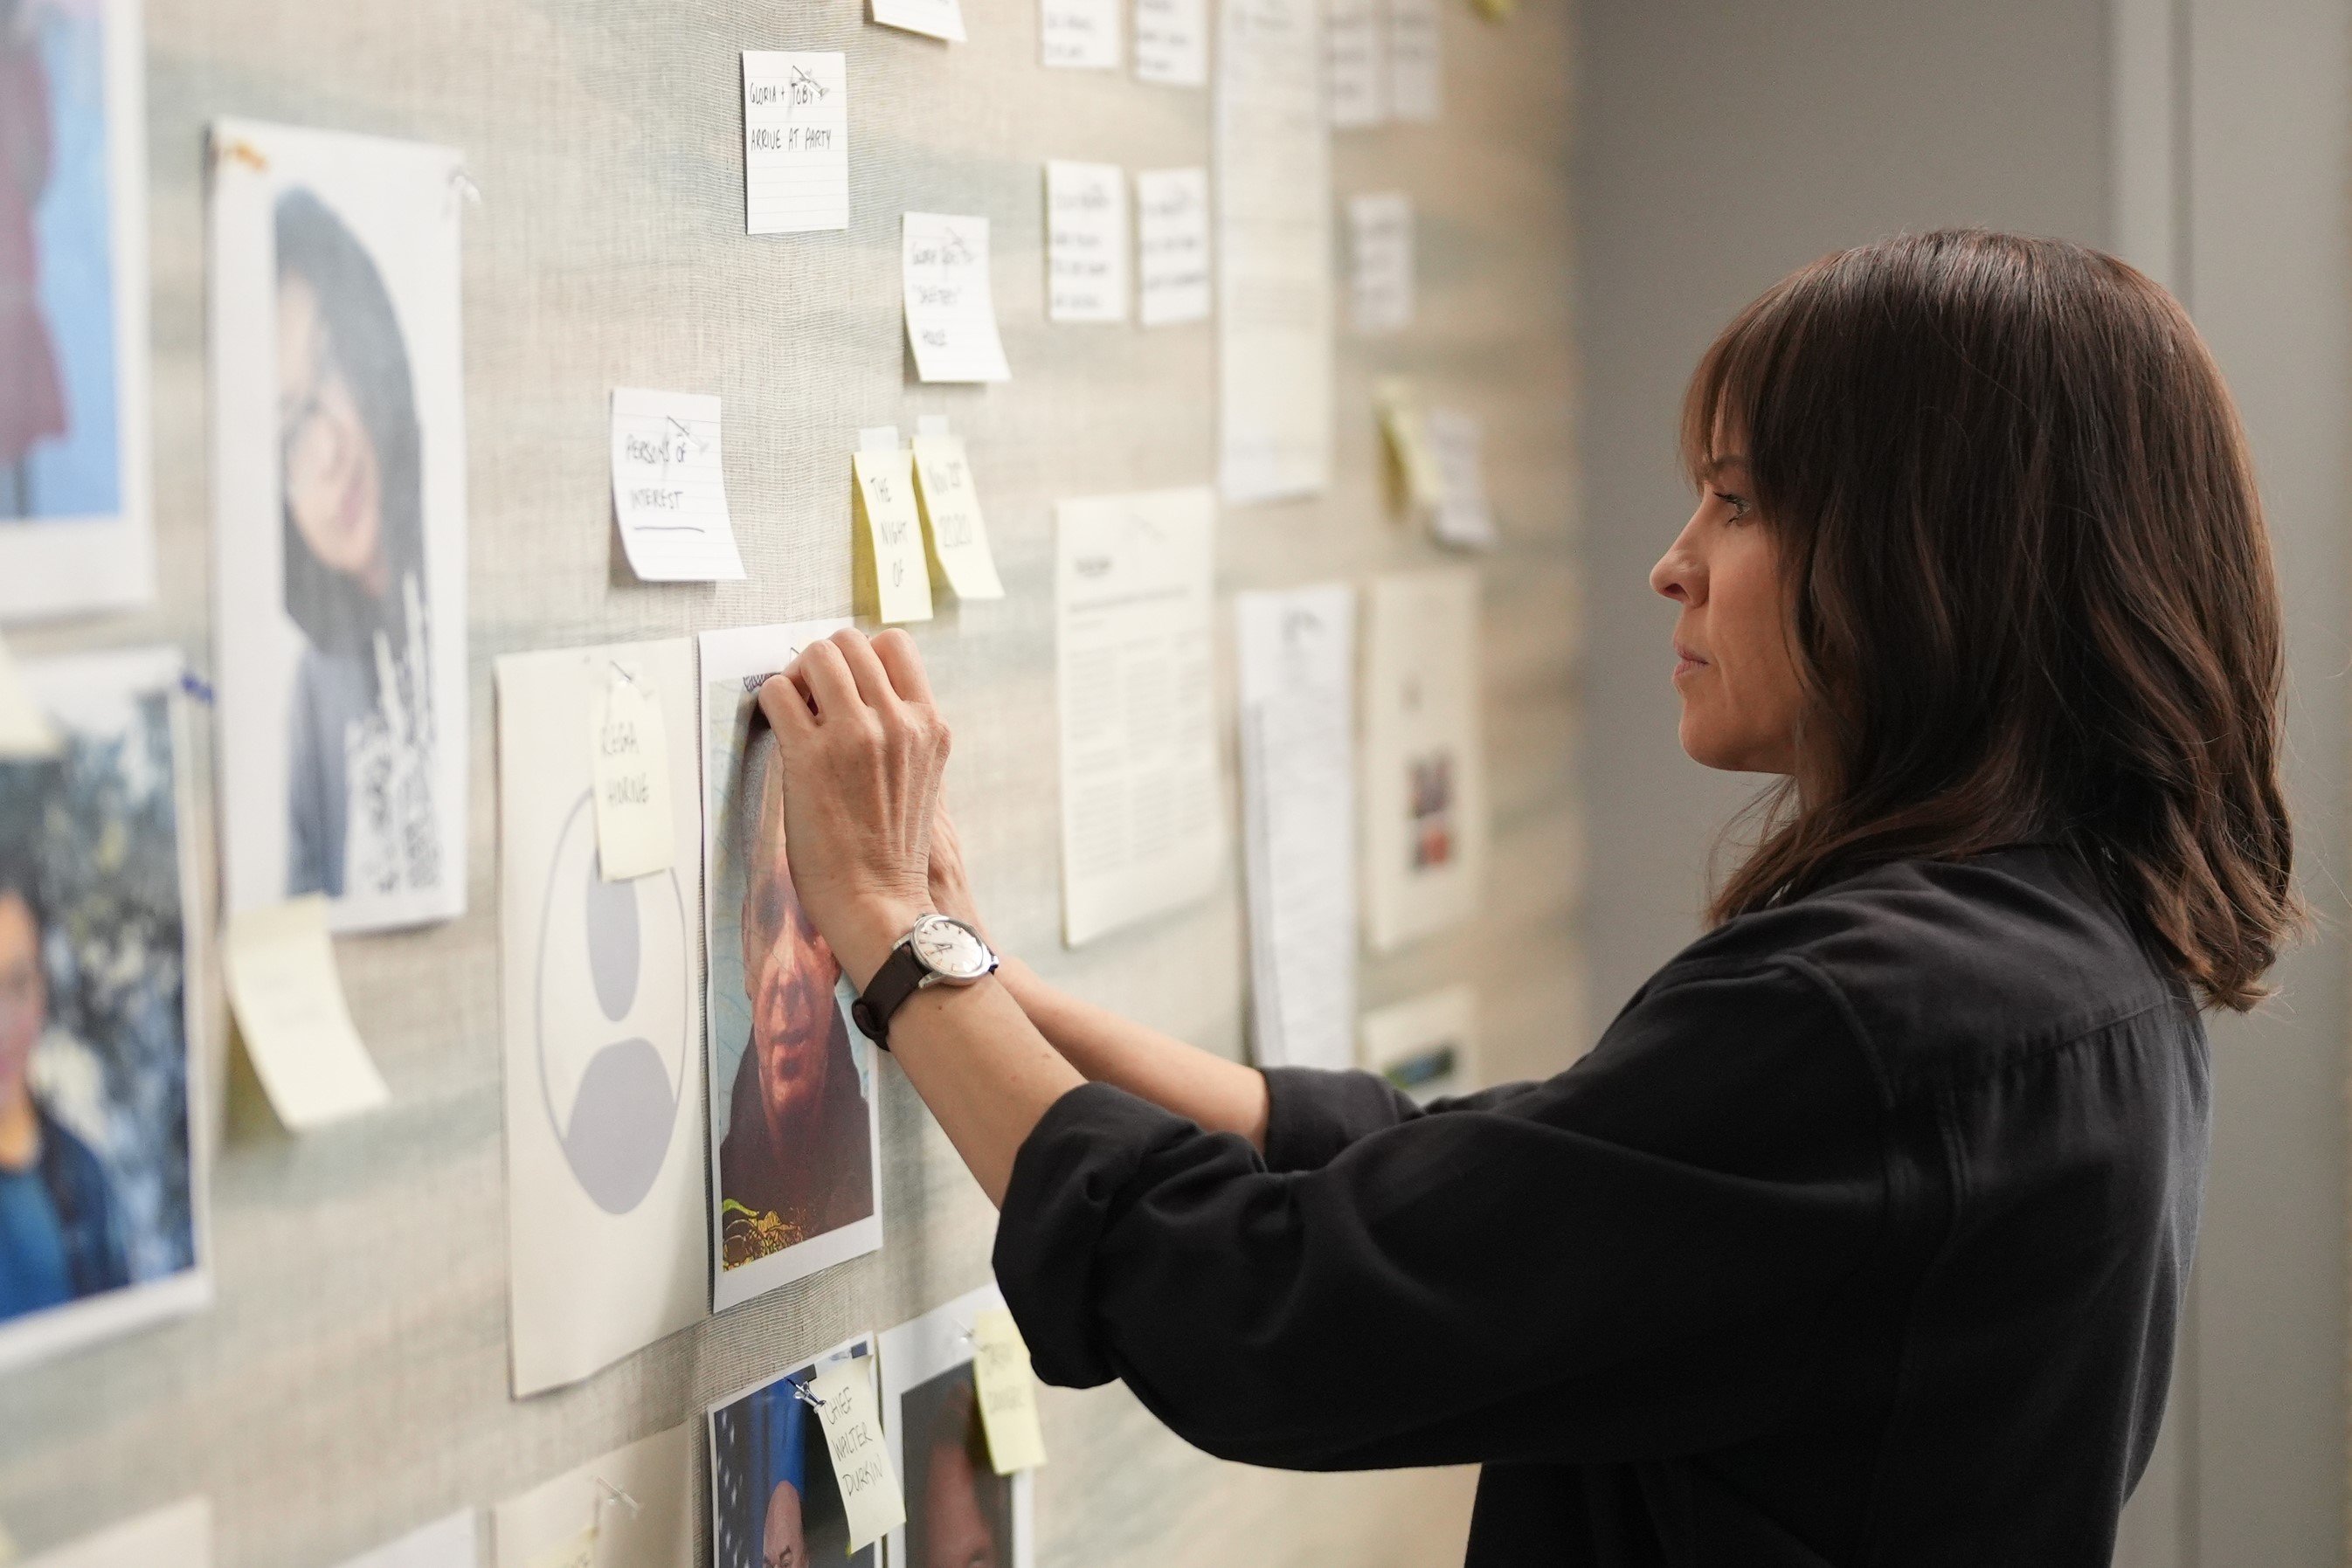 Hilary Swank as Eileen Fitzgerald, who appears in 'Alaska Daily' Episode 7 on ABC, wears a black button-up shirt while pinning a picture to a crime board.